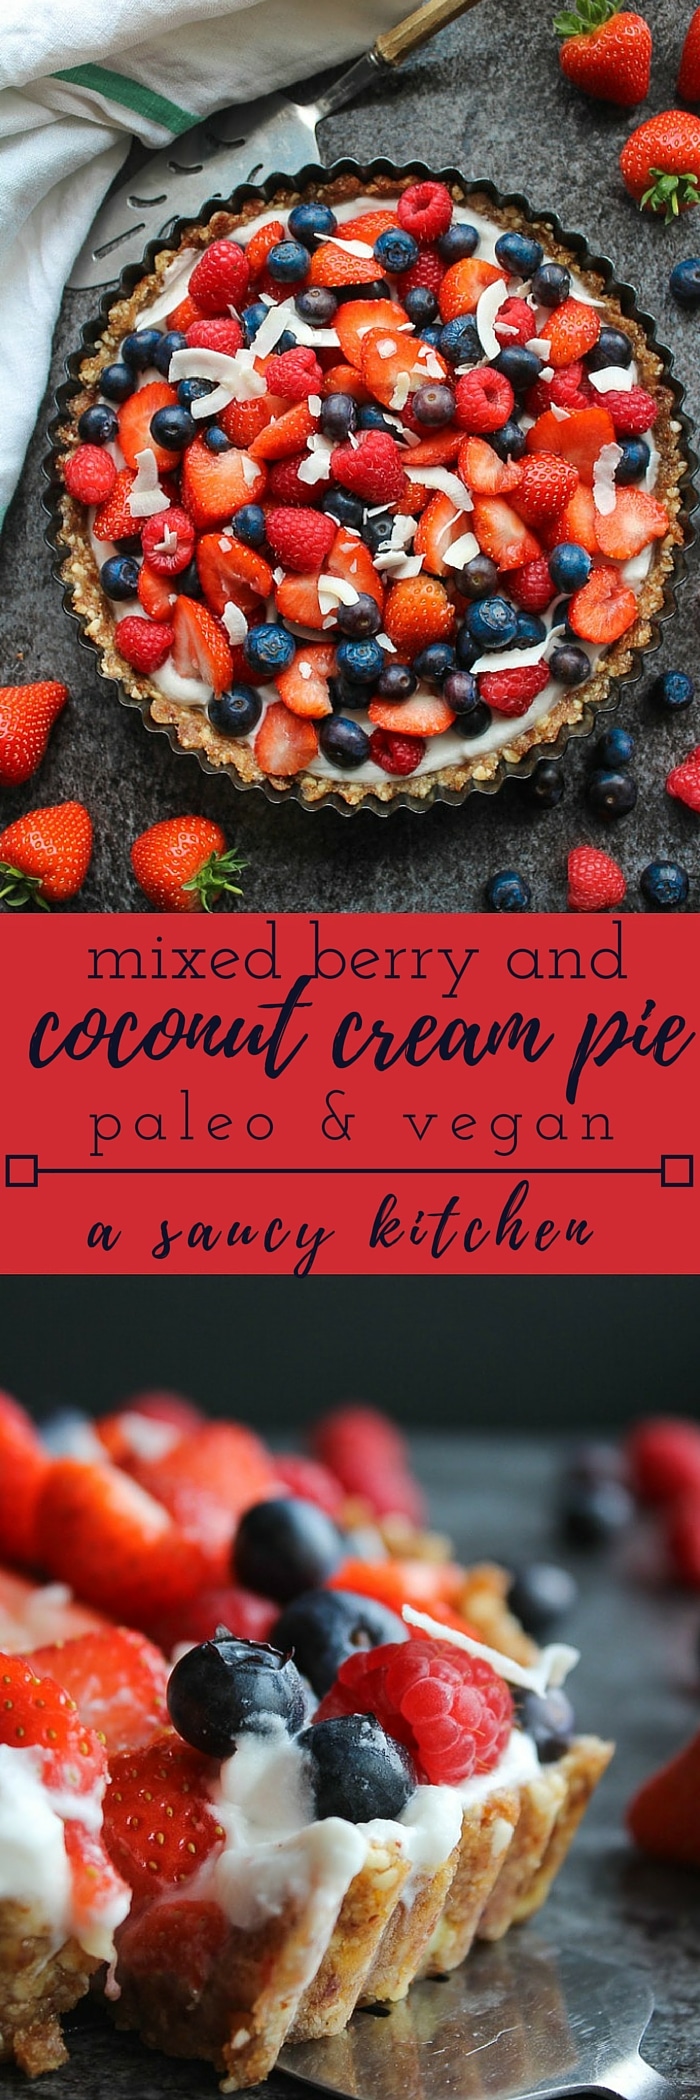 A simple, naturally sweetened summer berry and whipped coconut cream pie - paleo & vegan